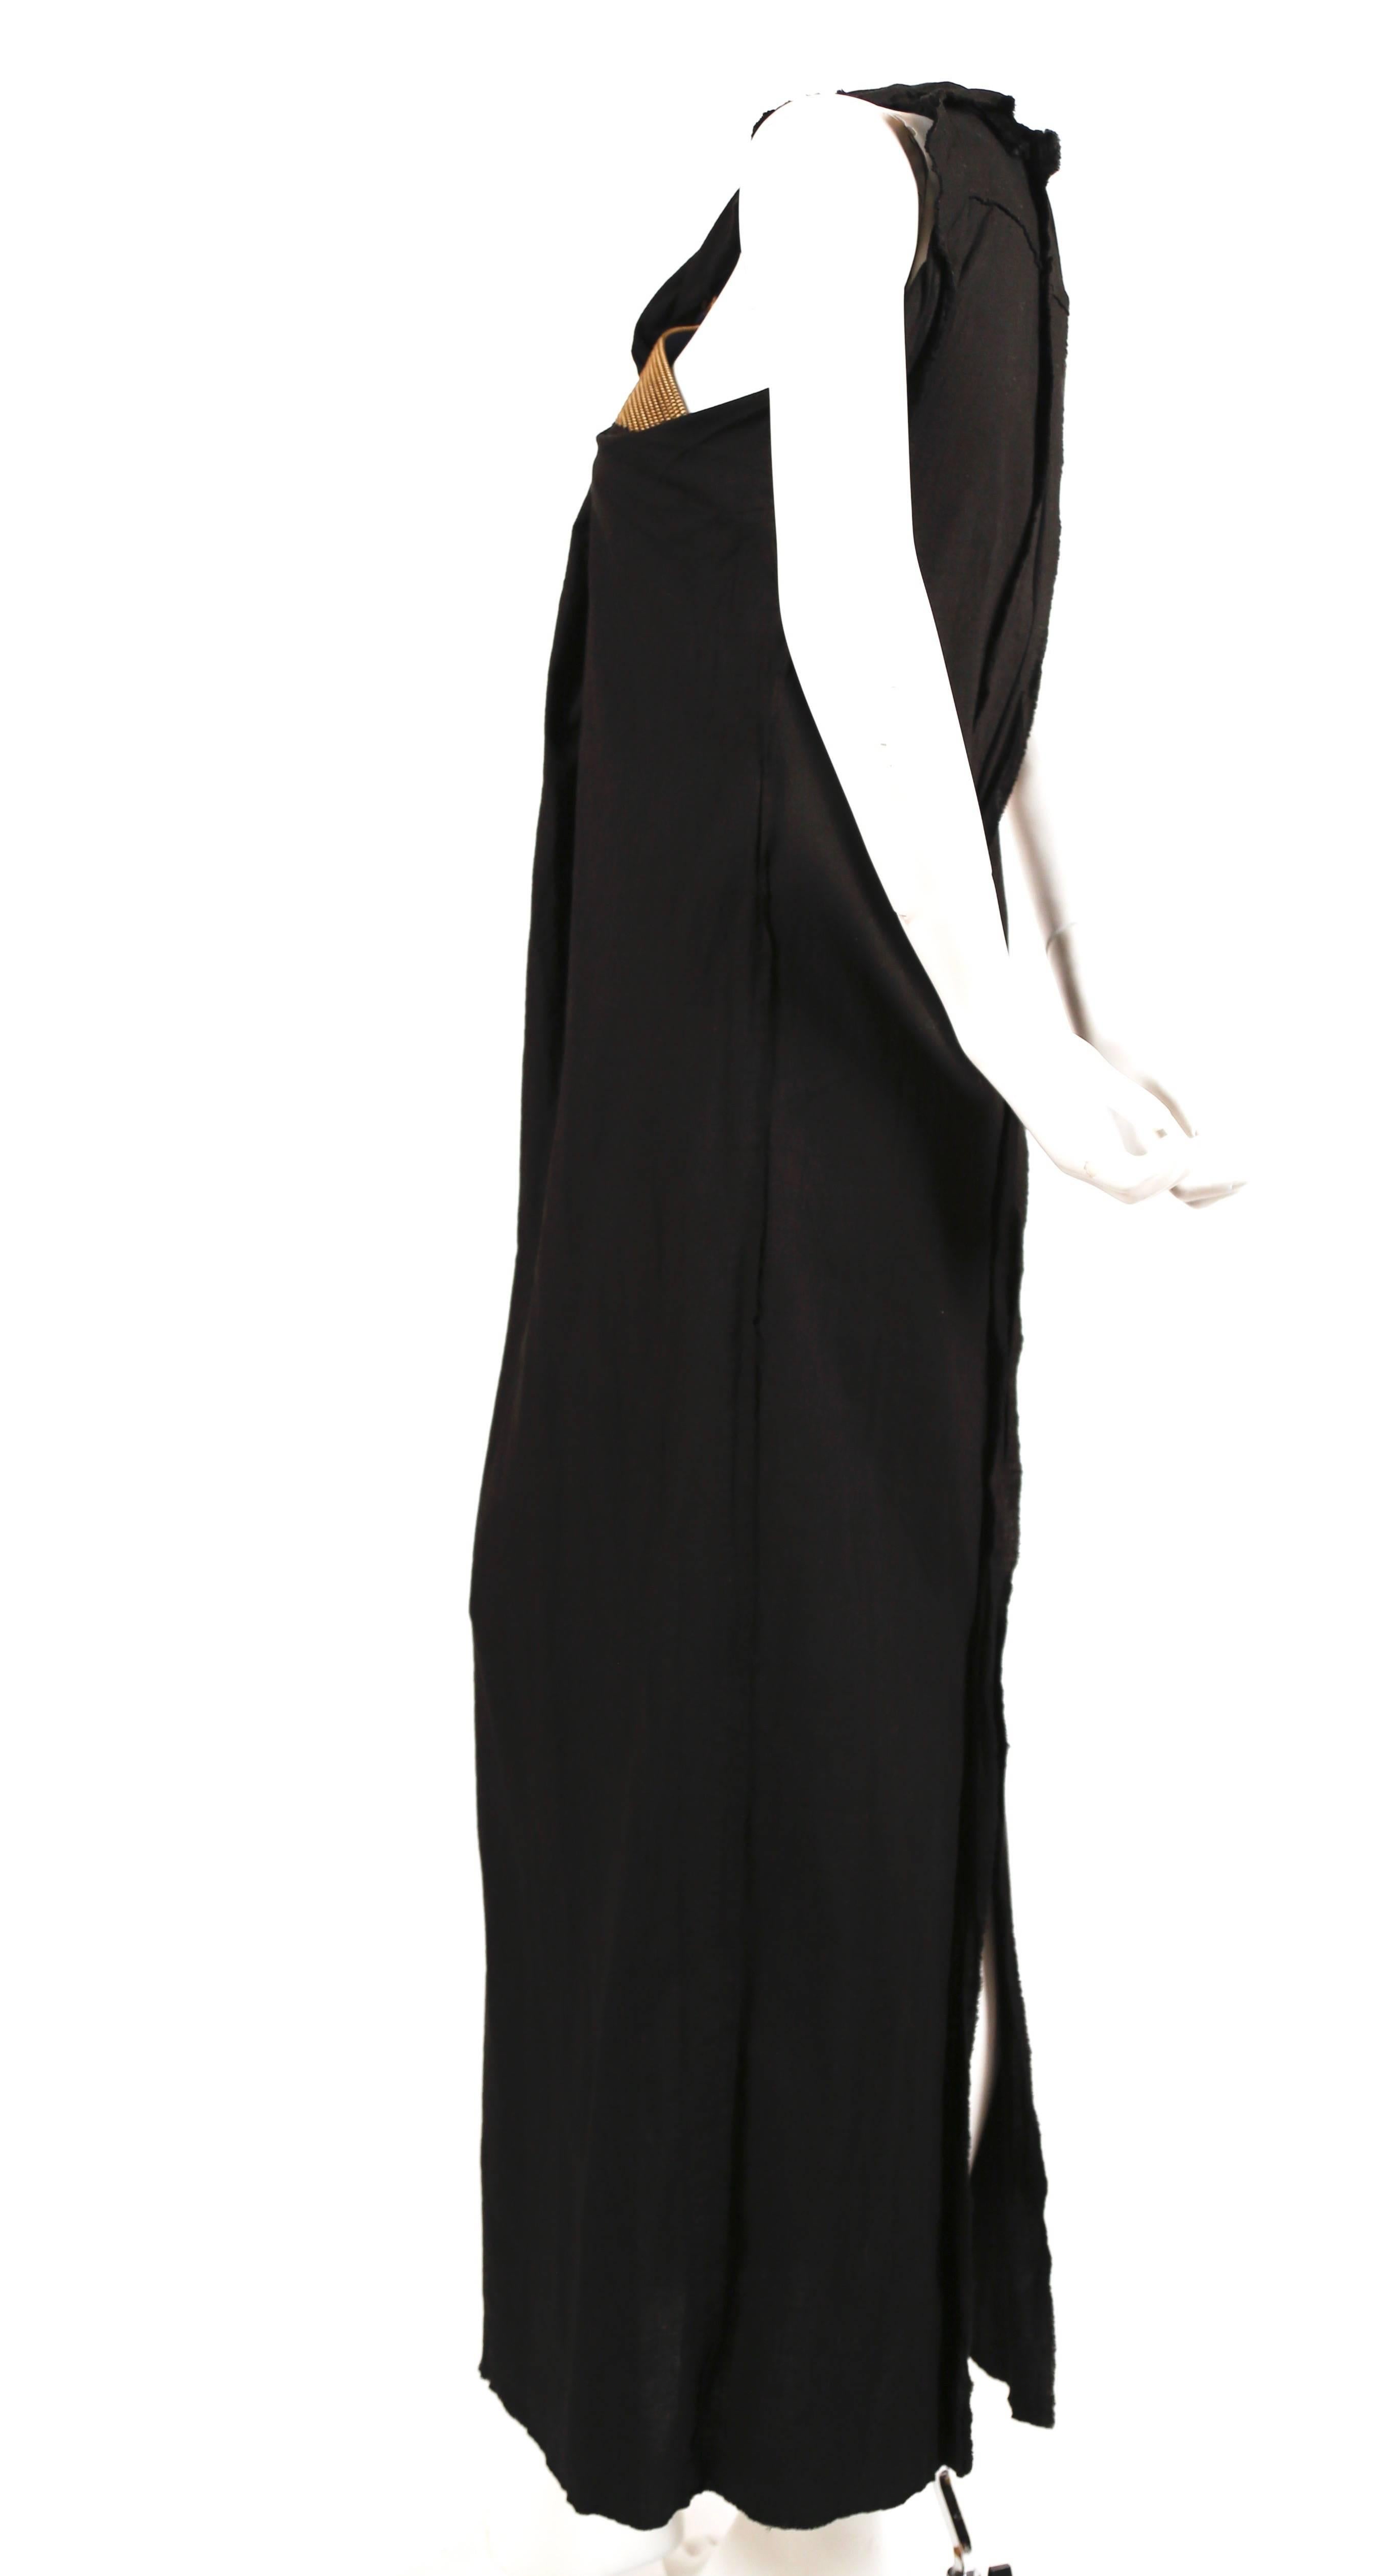 Black cotton muslin long dress with raw edges and unique layered brass zipper trim by Junya Watanabe for Comme Des Garcons exactly as seen on the spring 2005 runway. Size S. Approximate measurements: bust 34